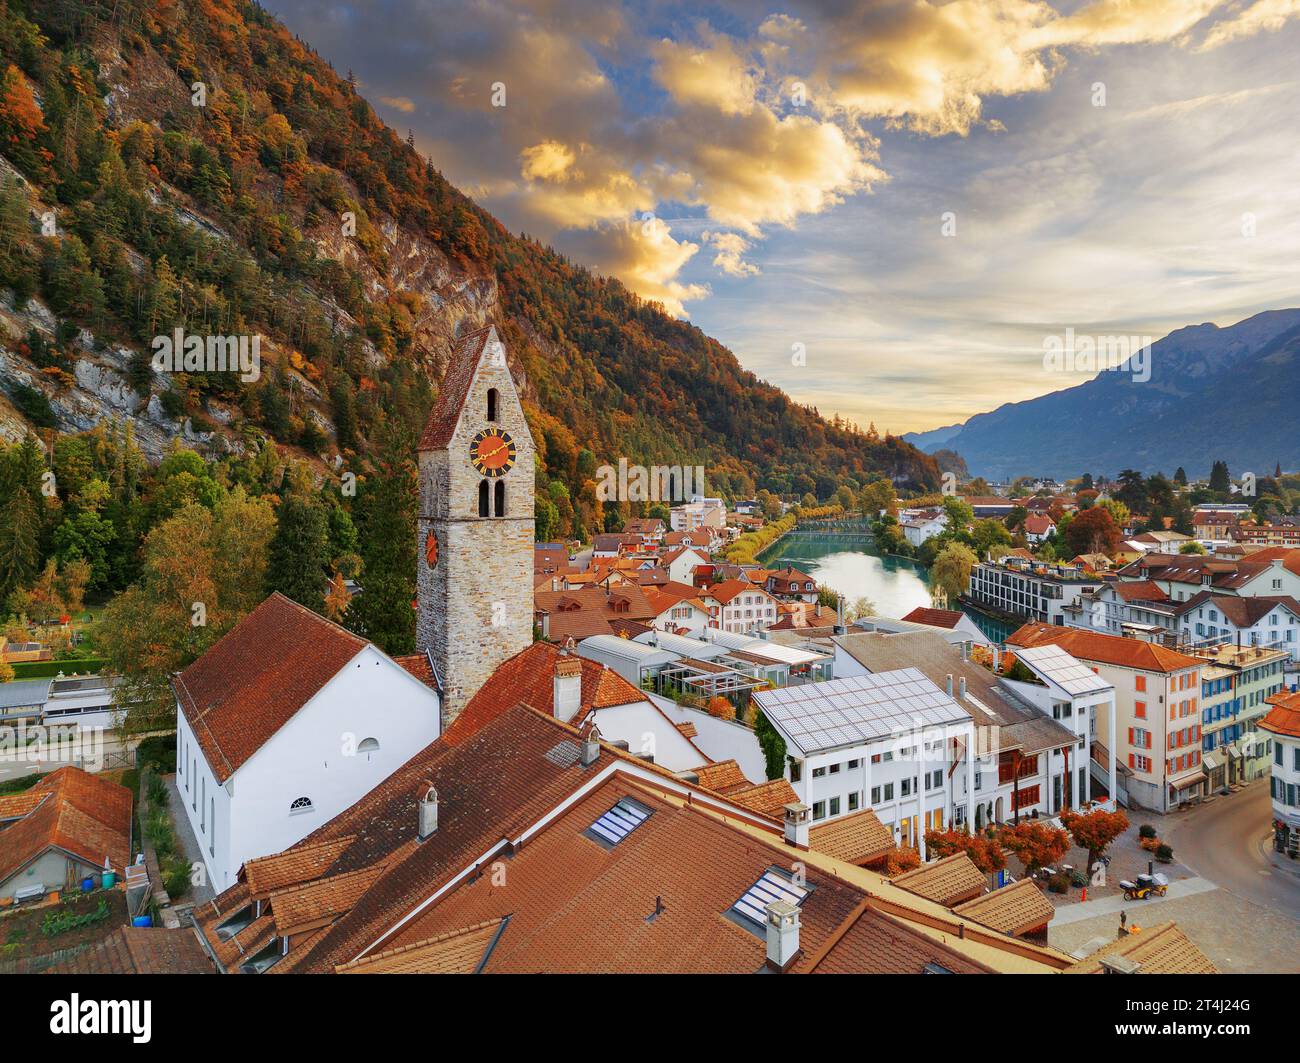 Interlaken, Switzerland from above the square at dawn. Stock Photo